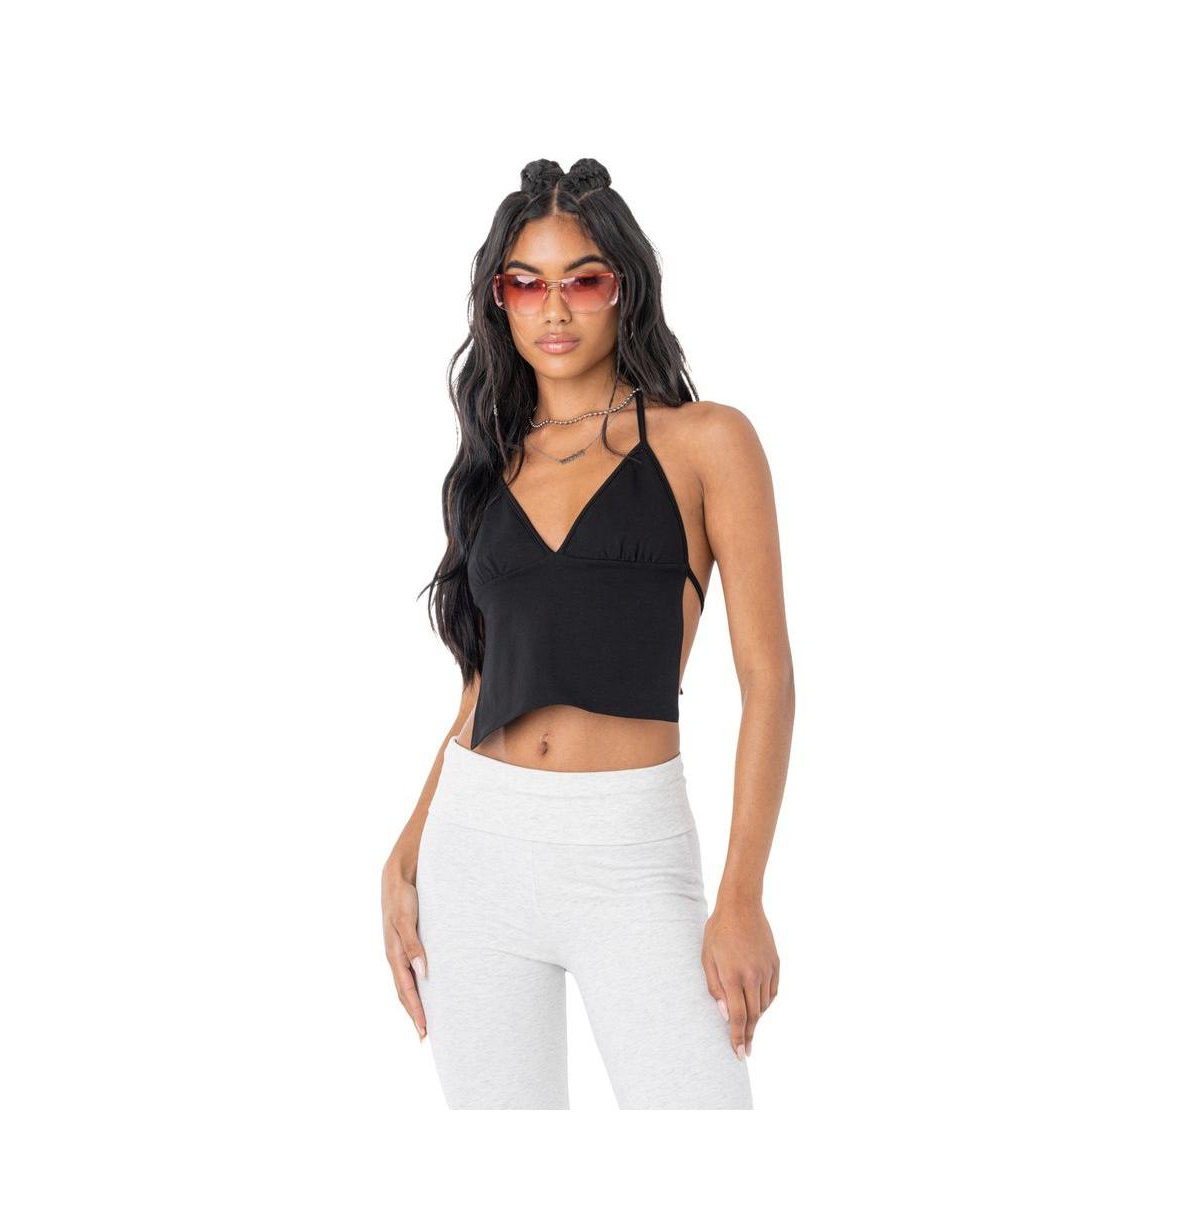 Women's Top With Tie In The Back - Black